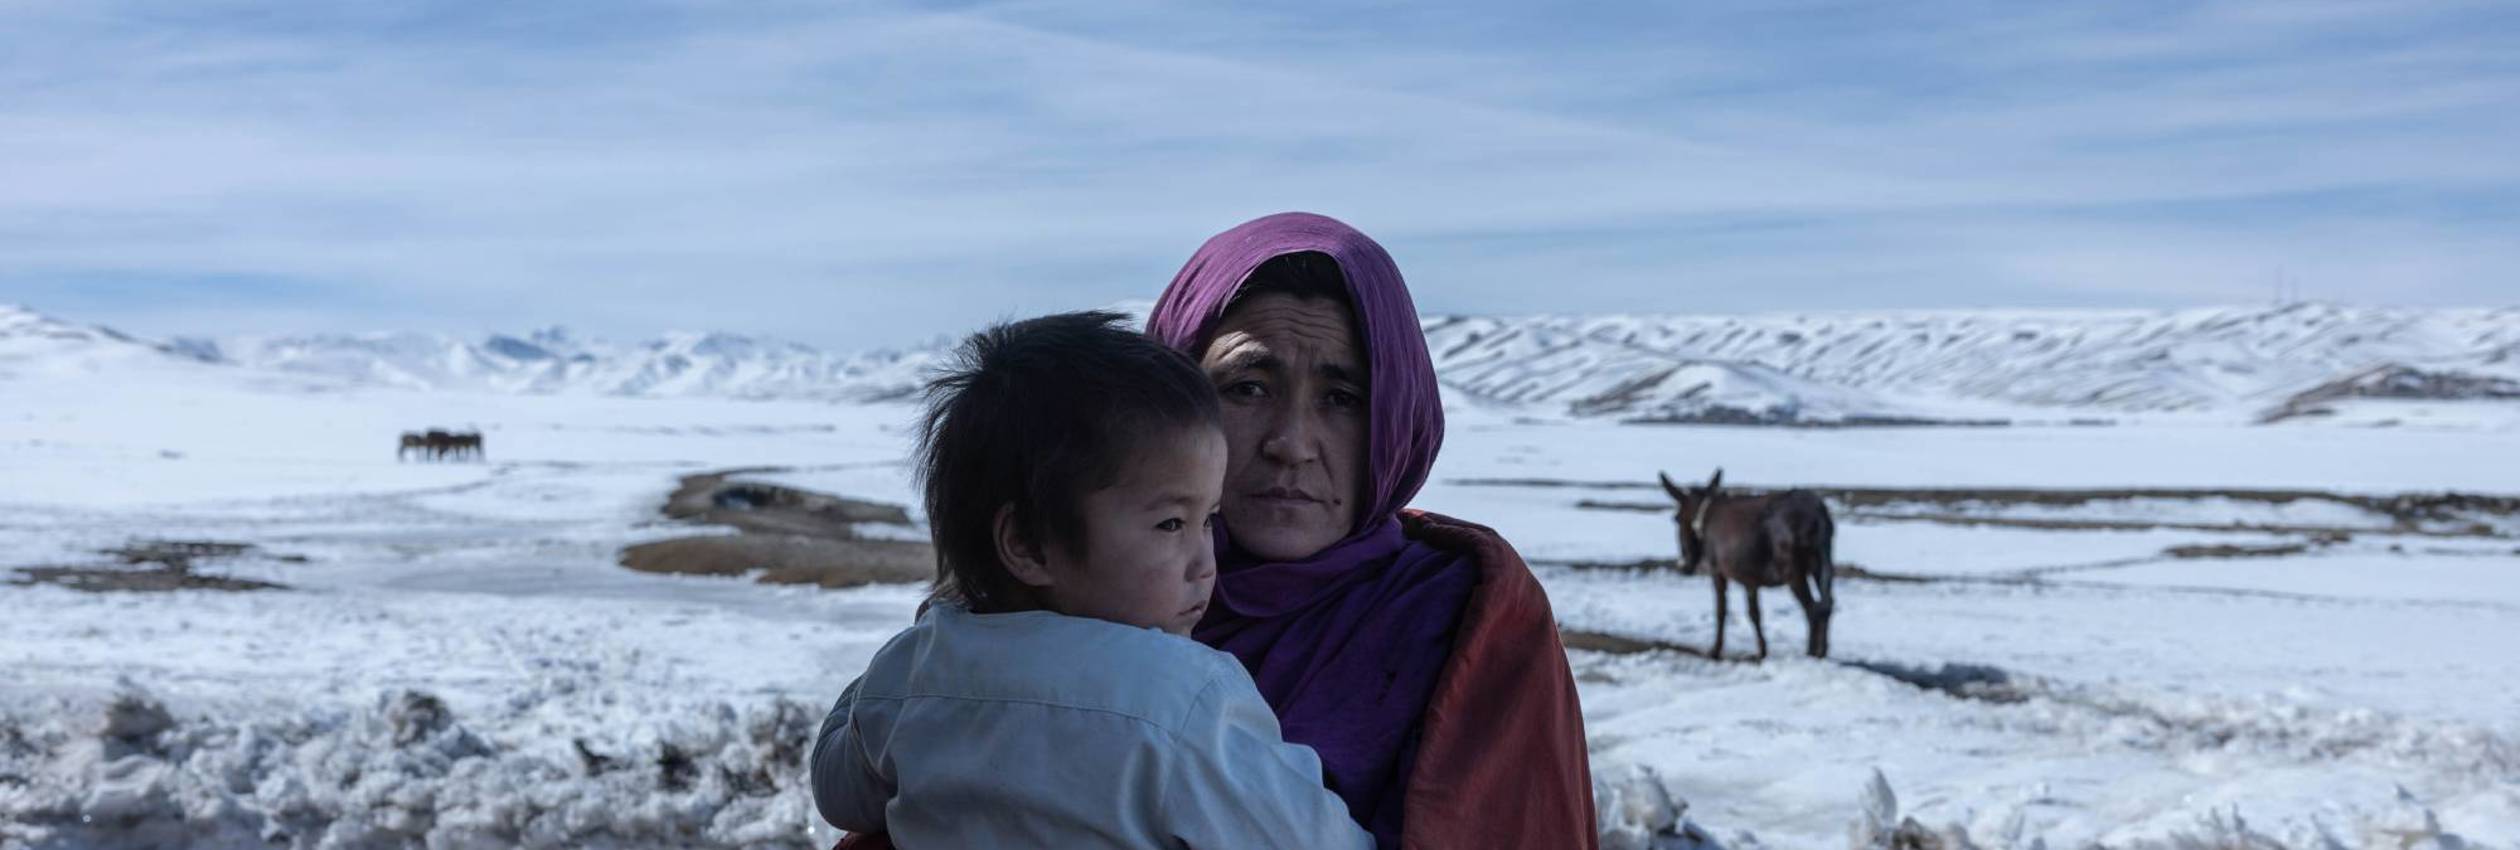 Afghan woman Zahra*, 34, looks at the camera while holding her baby daughter, a snowy landscape in the background.